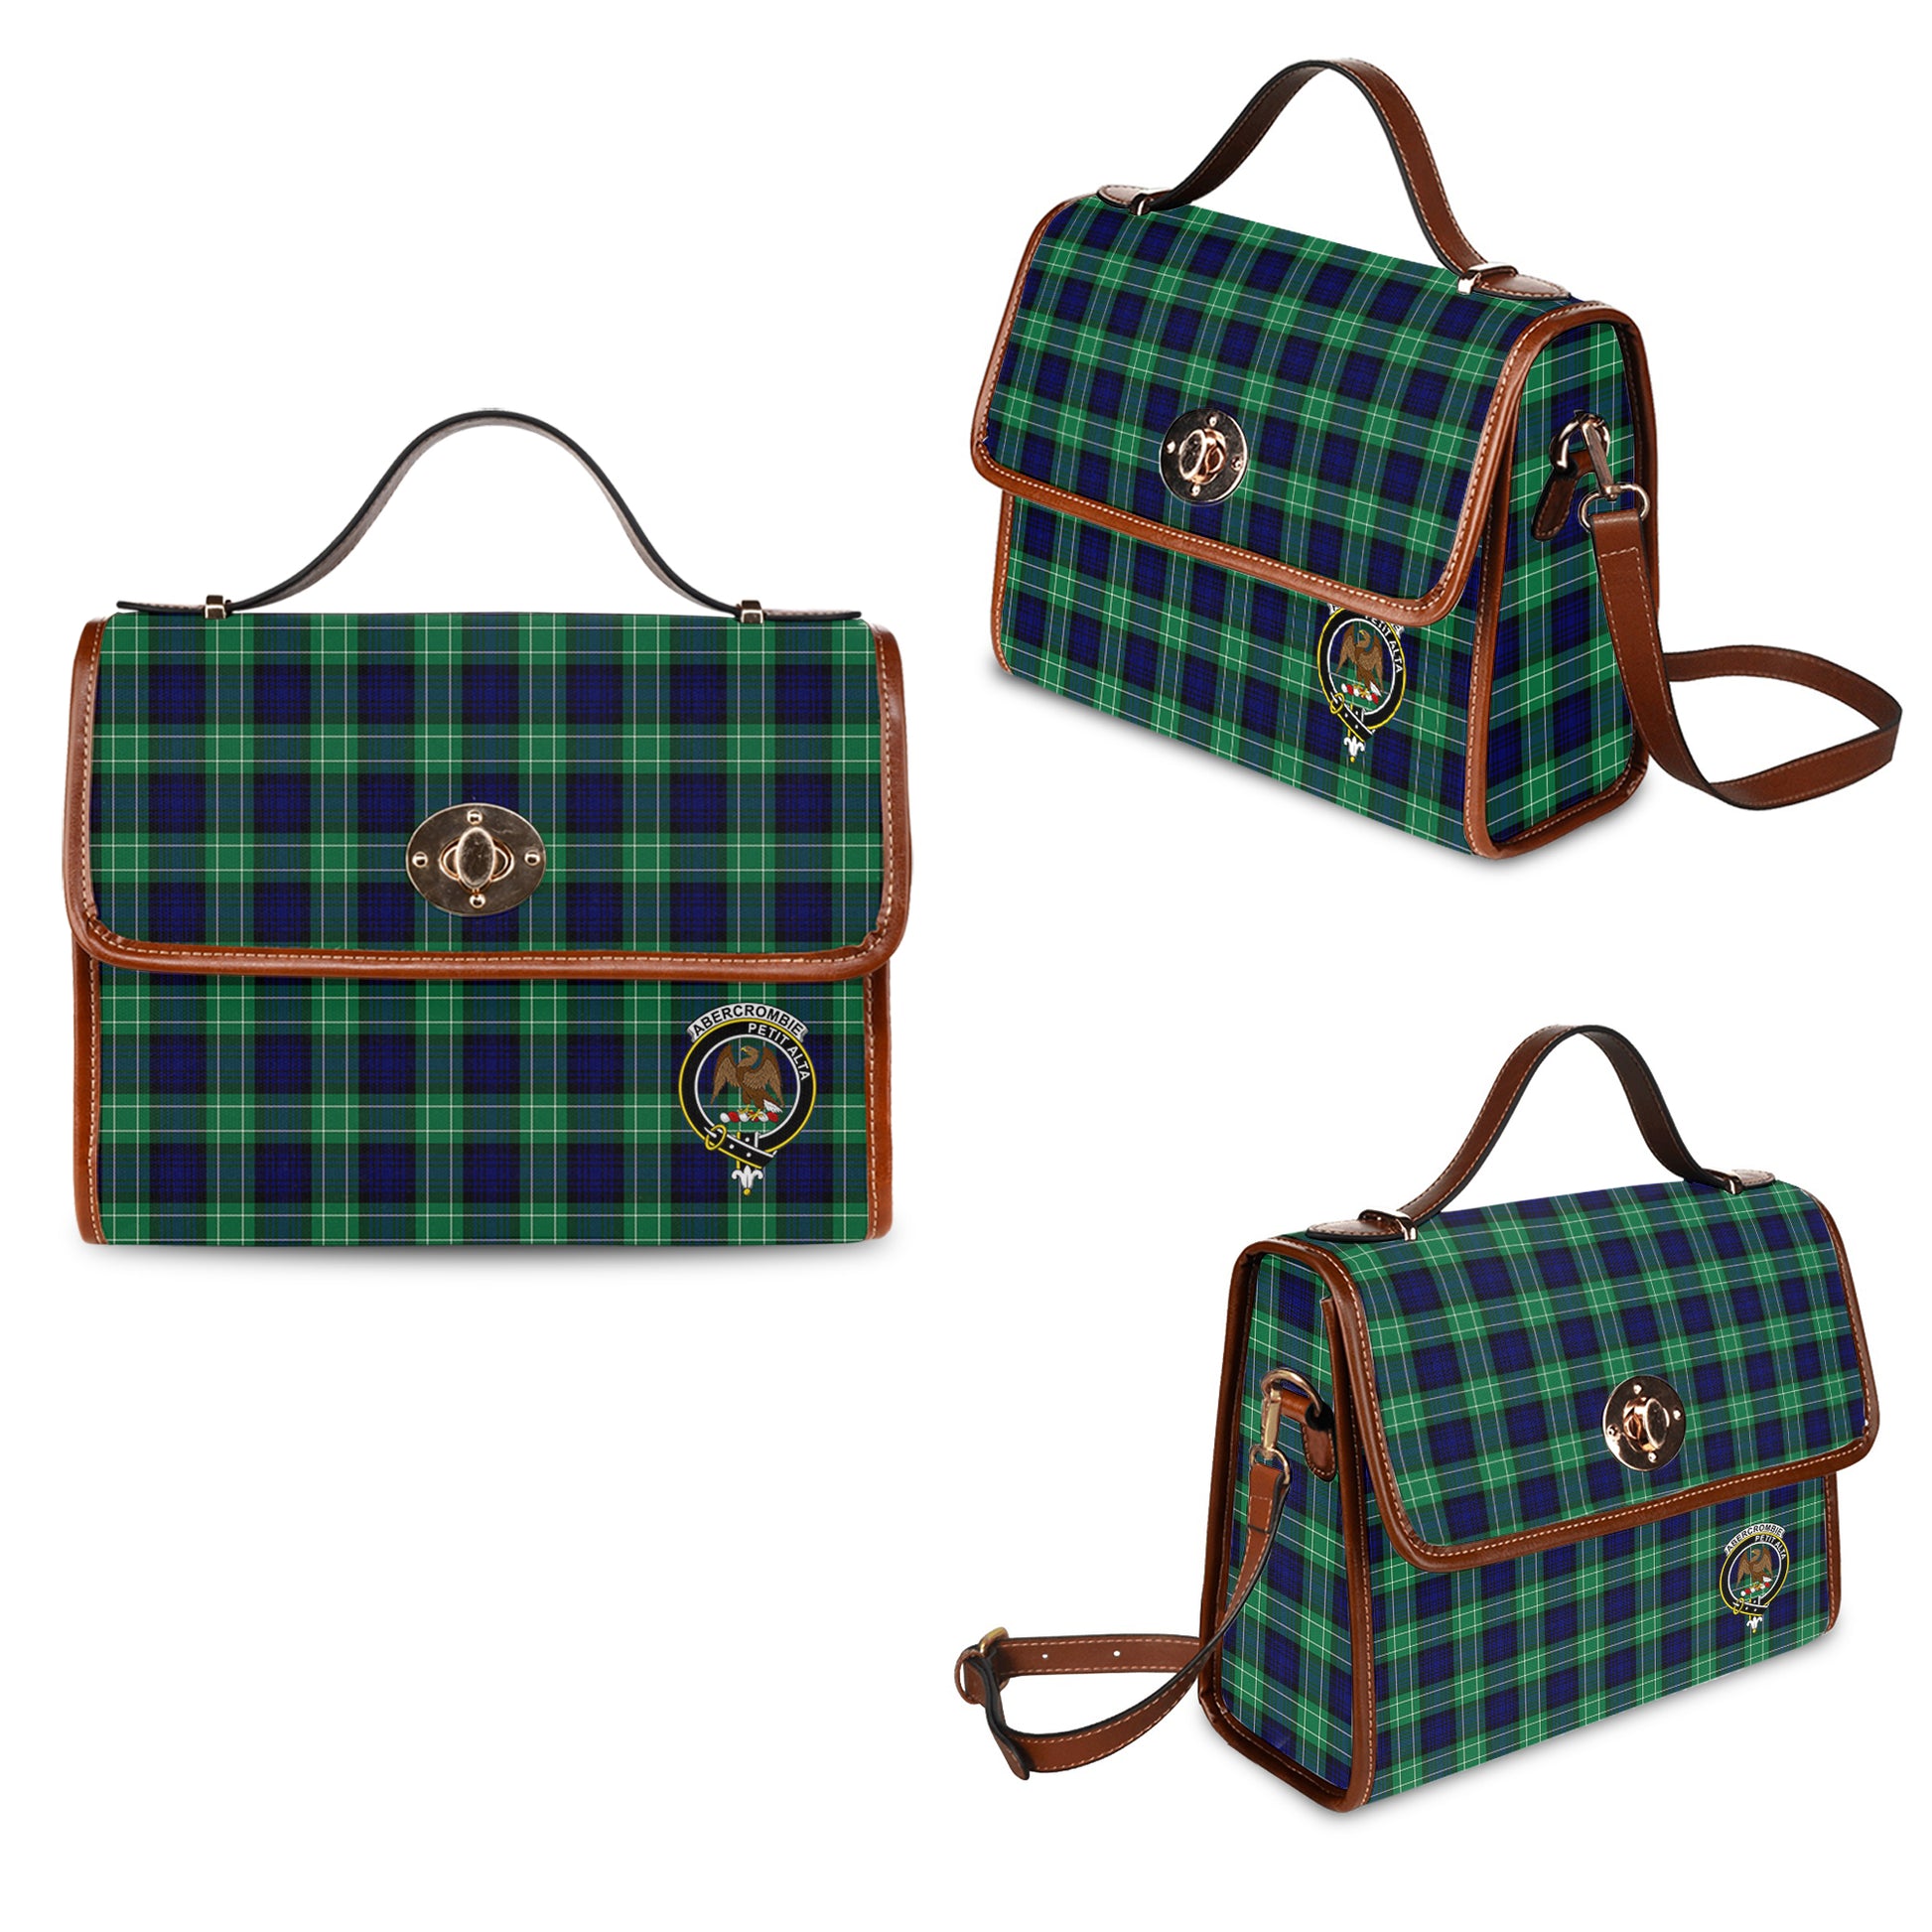 Abercrombie Tartan Leather Strap Waterproof Canvas Bag with Family Crest One Size 34cm * 42cm (13.4" x 16.5") - Tartanvibesclothing